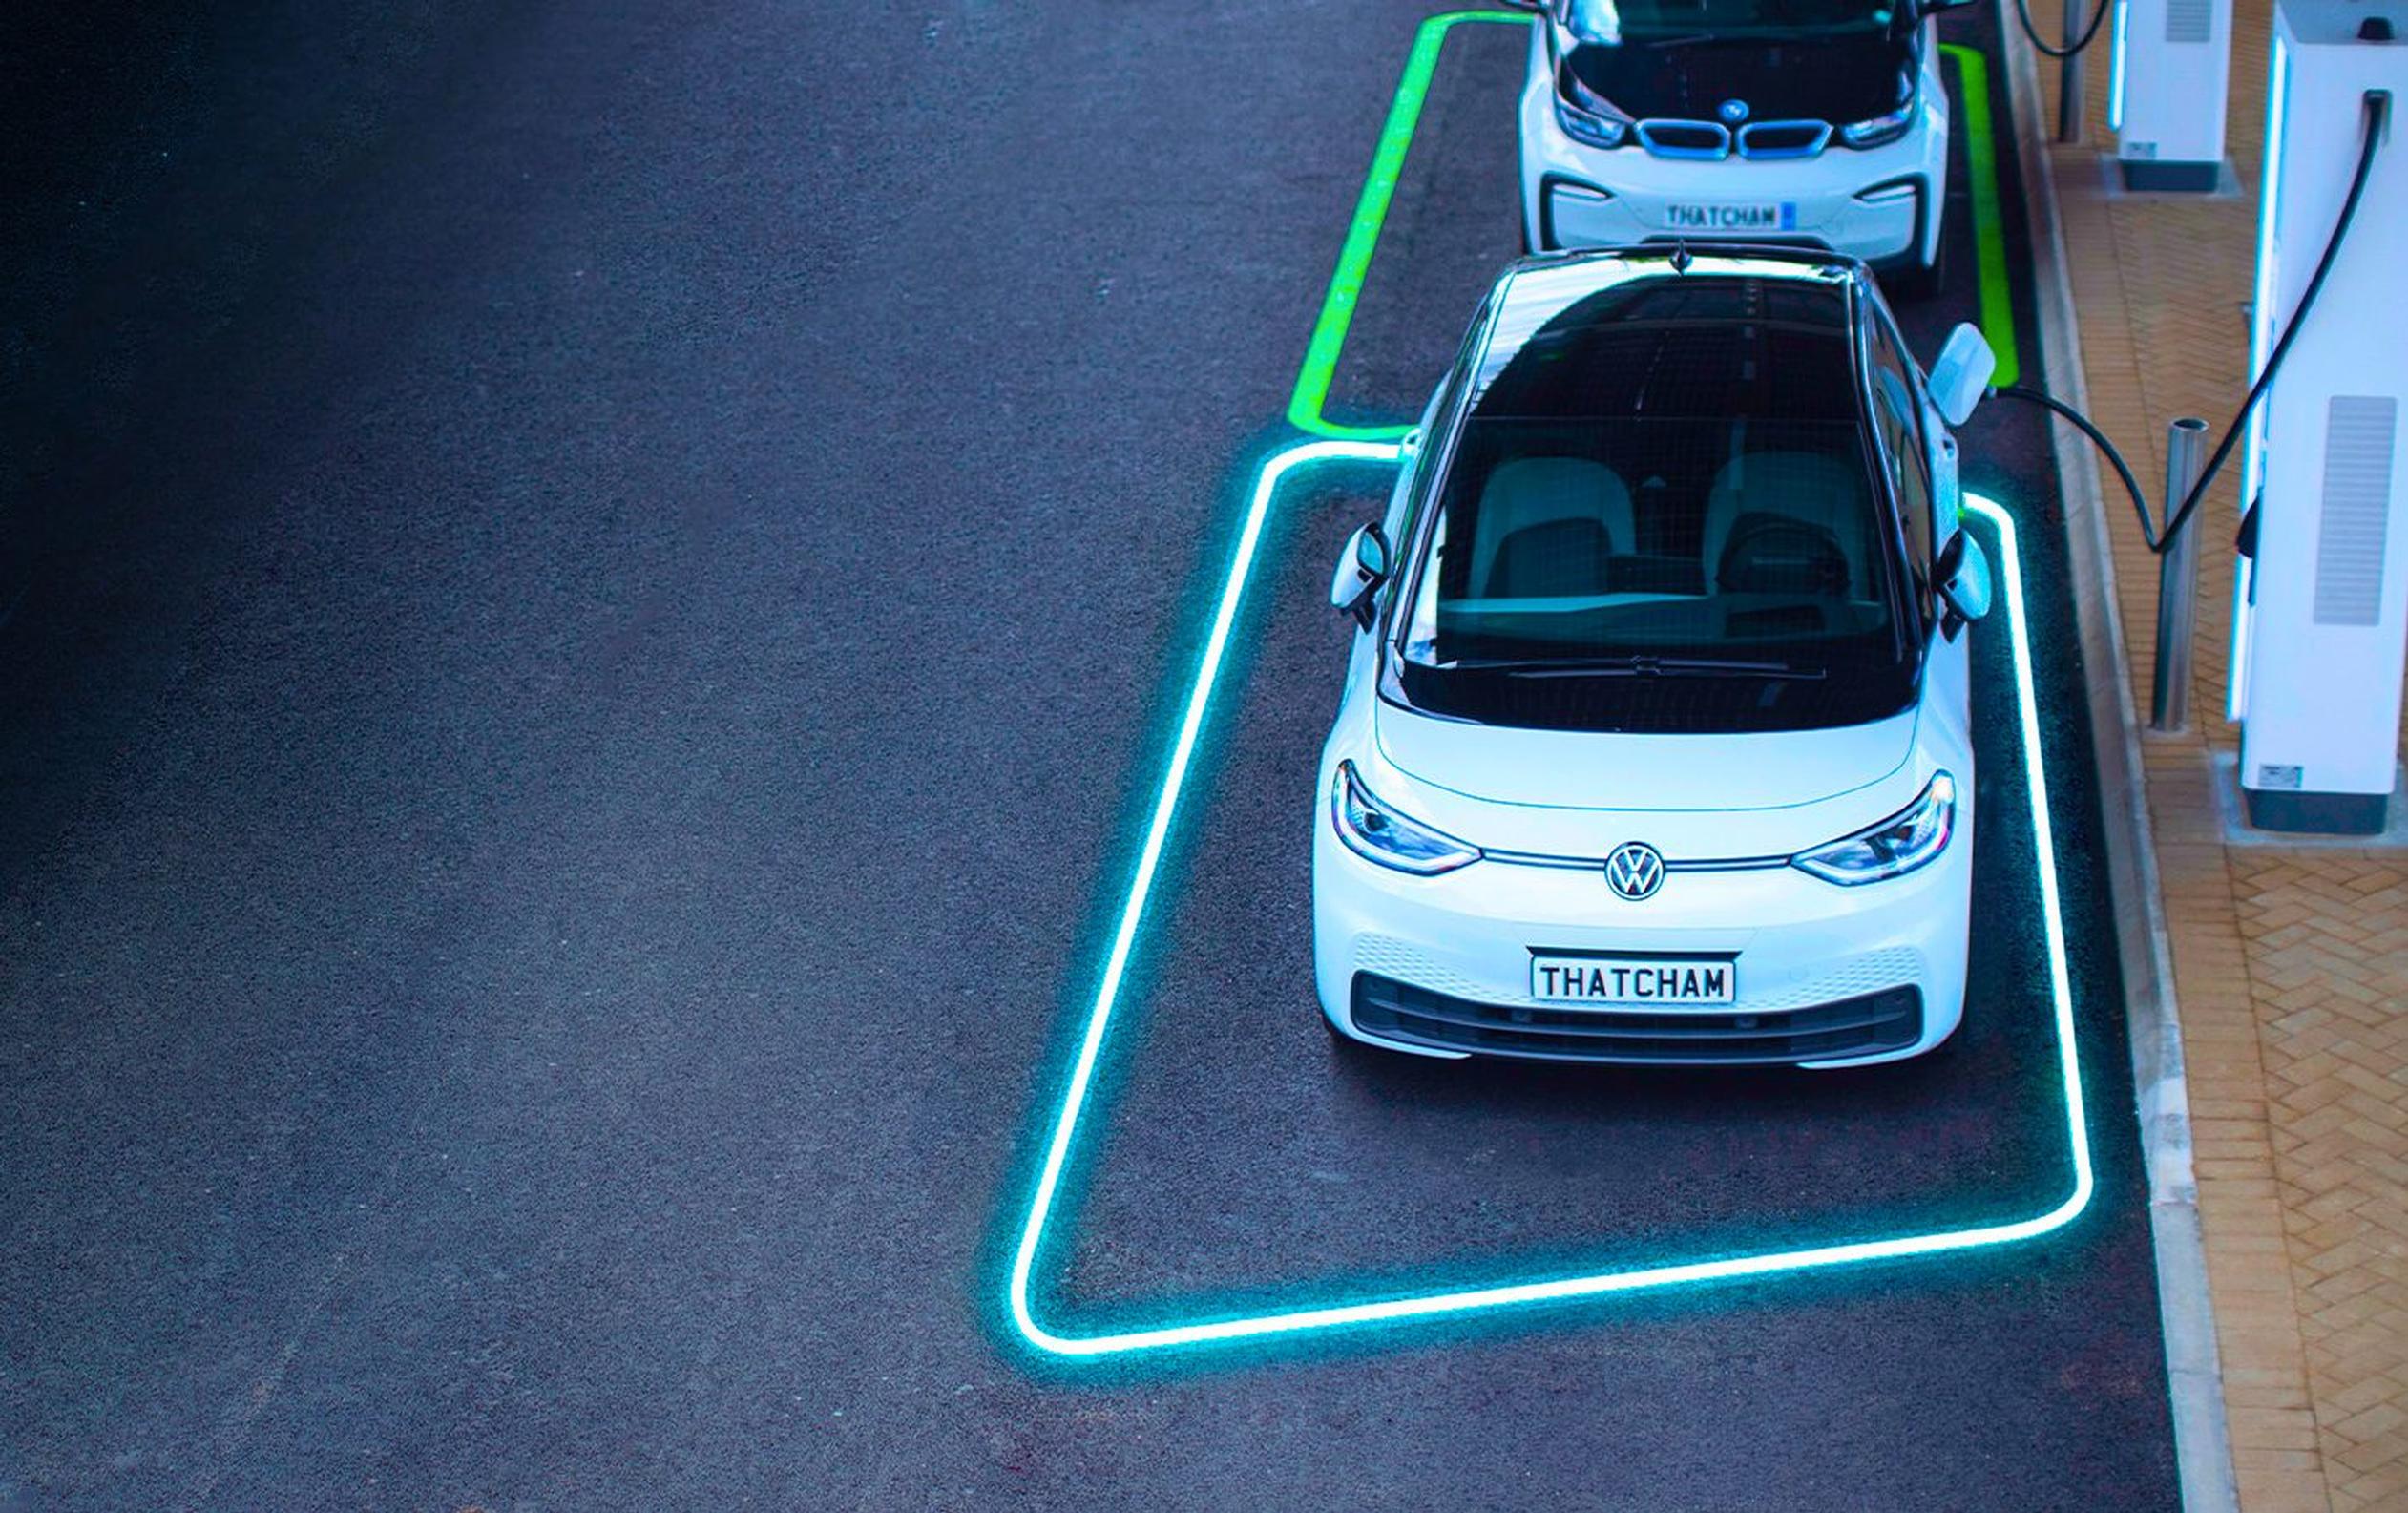 EVs are set to play a central role in achieving the UK government’s 2050 net zero target